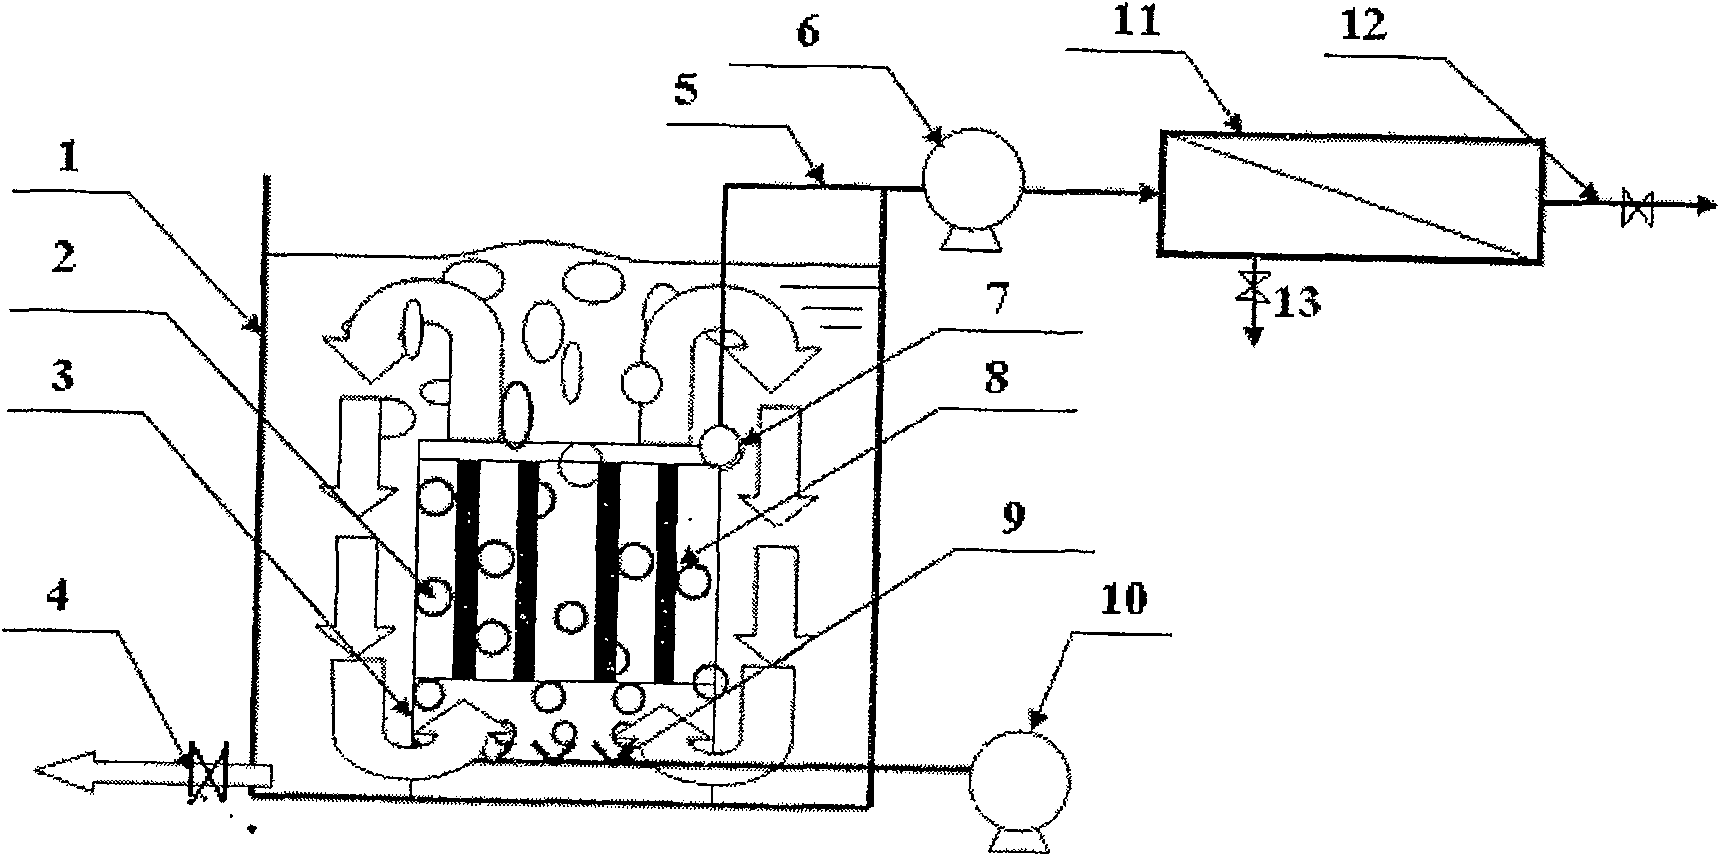 Method of processing semi-conductor industrial waste water